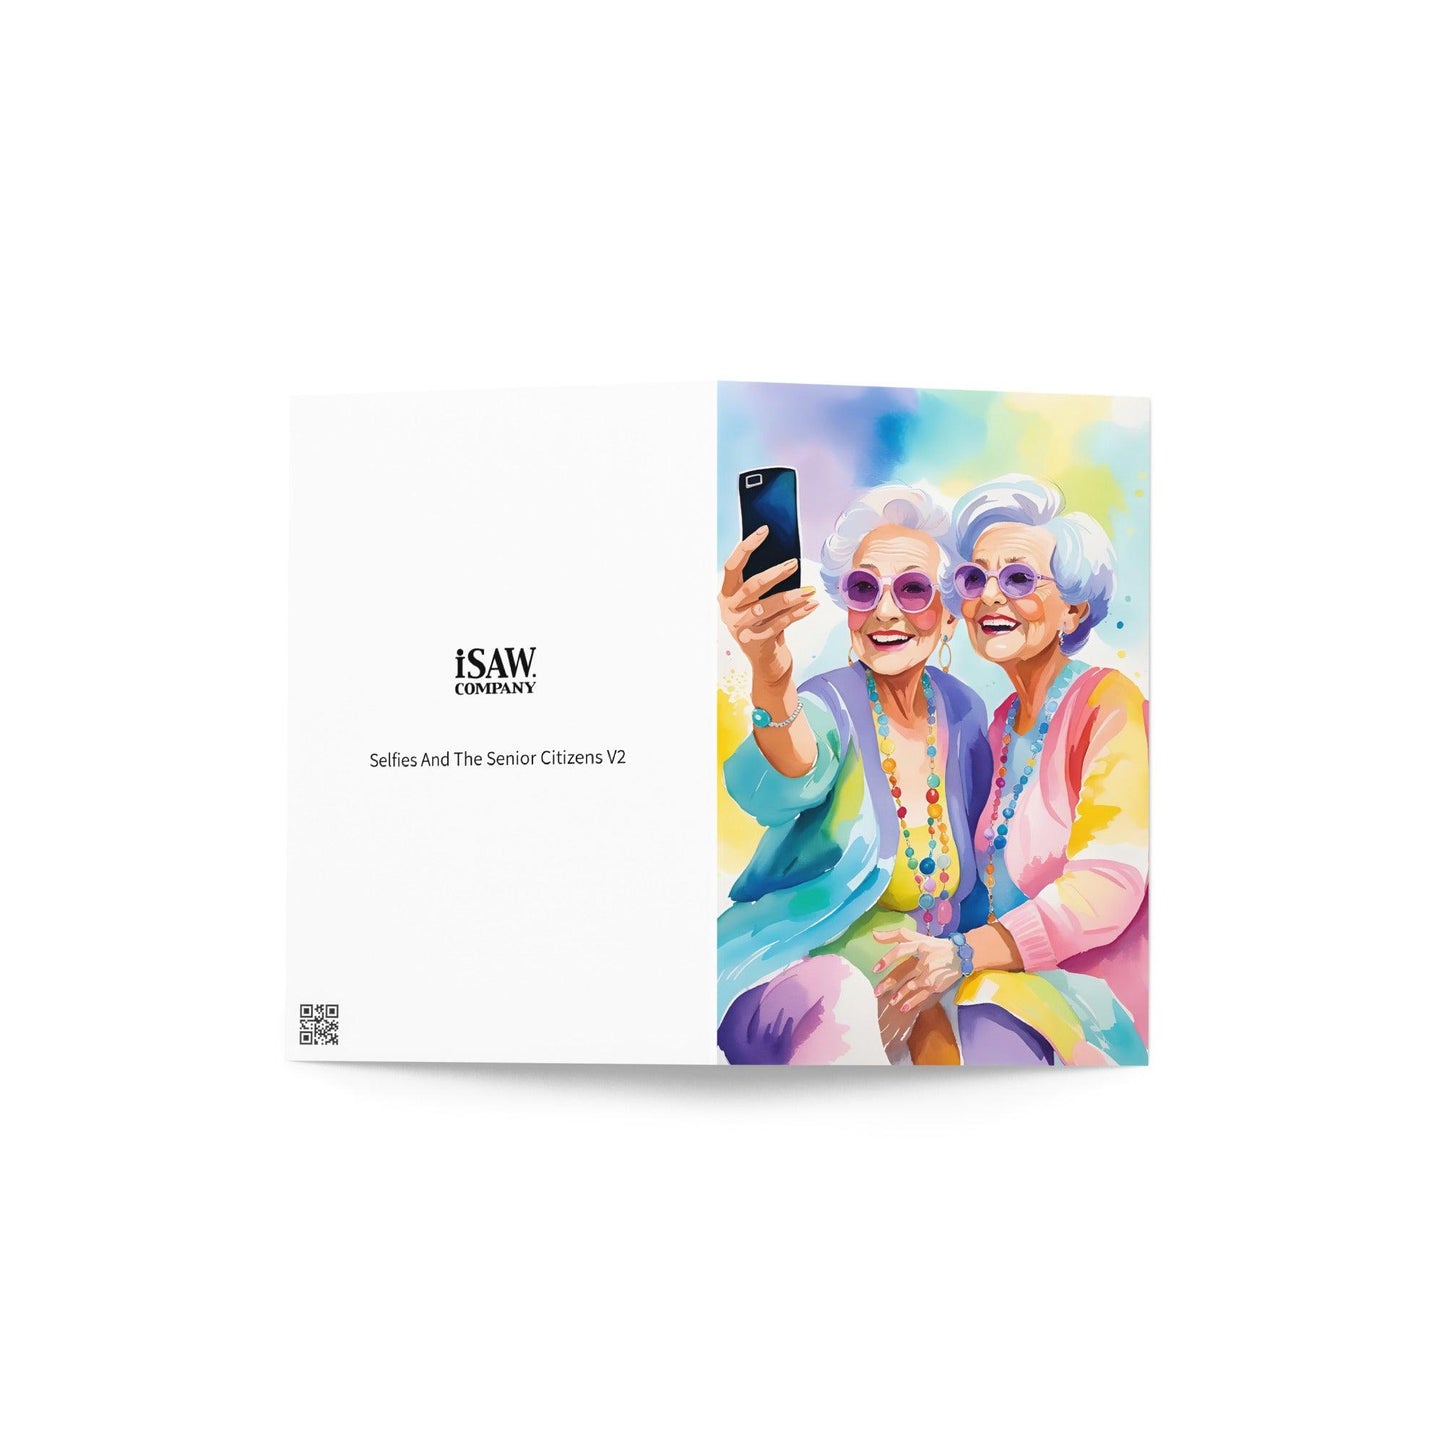 Selfies And The Senior Citizens V2 - Note Card - iSAW Company